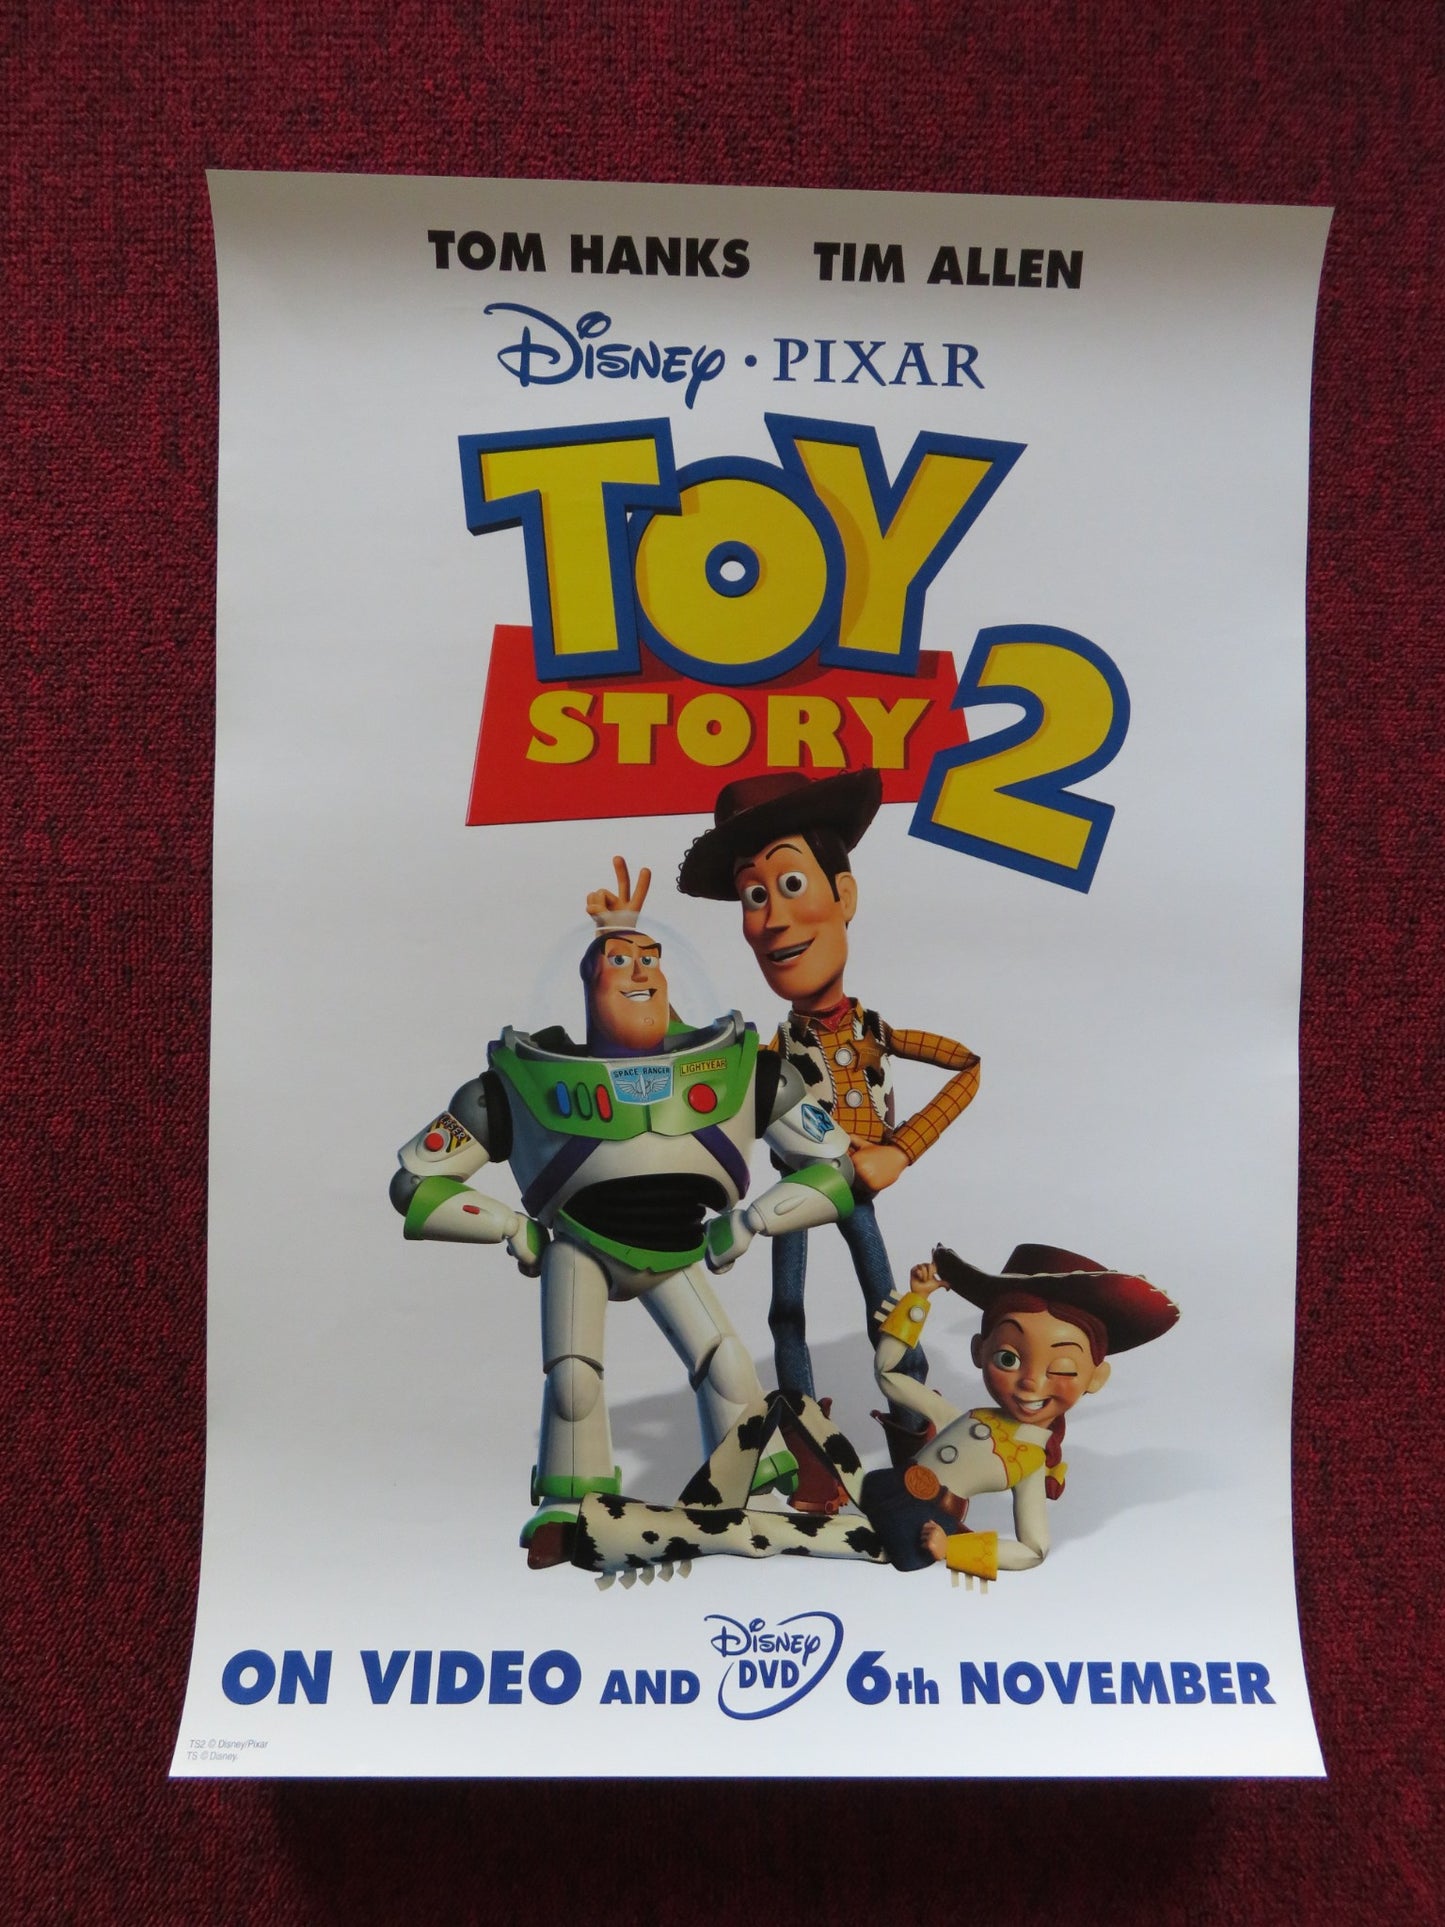 toy story 2 poster